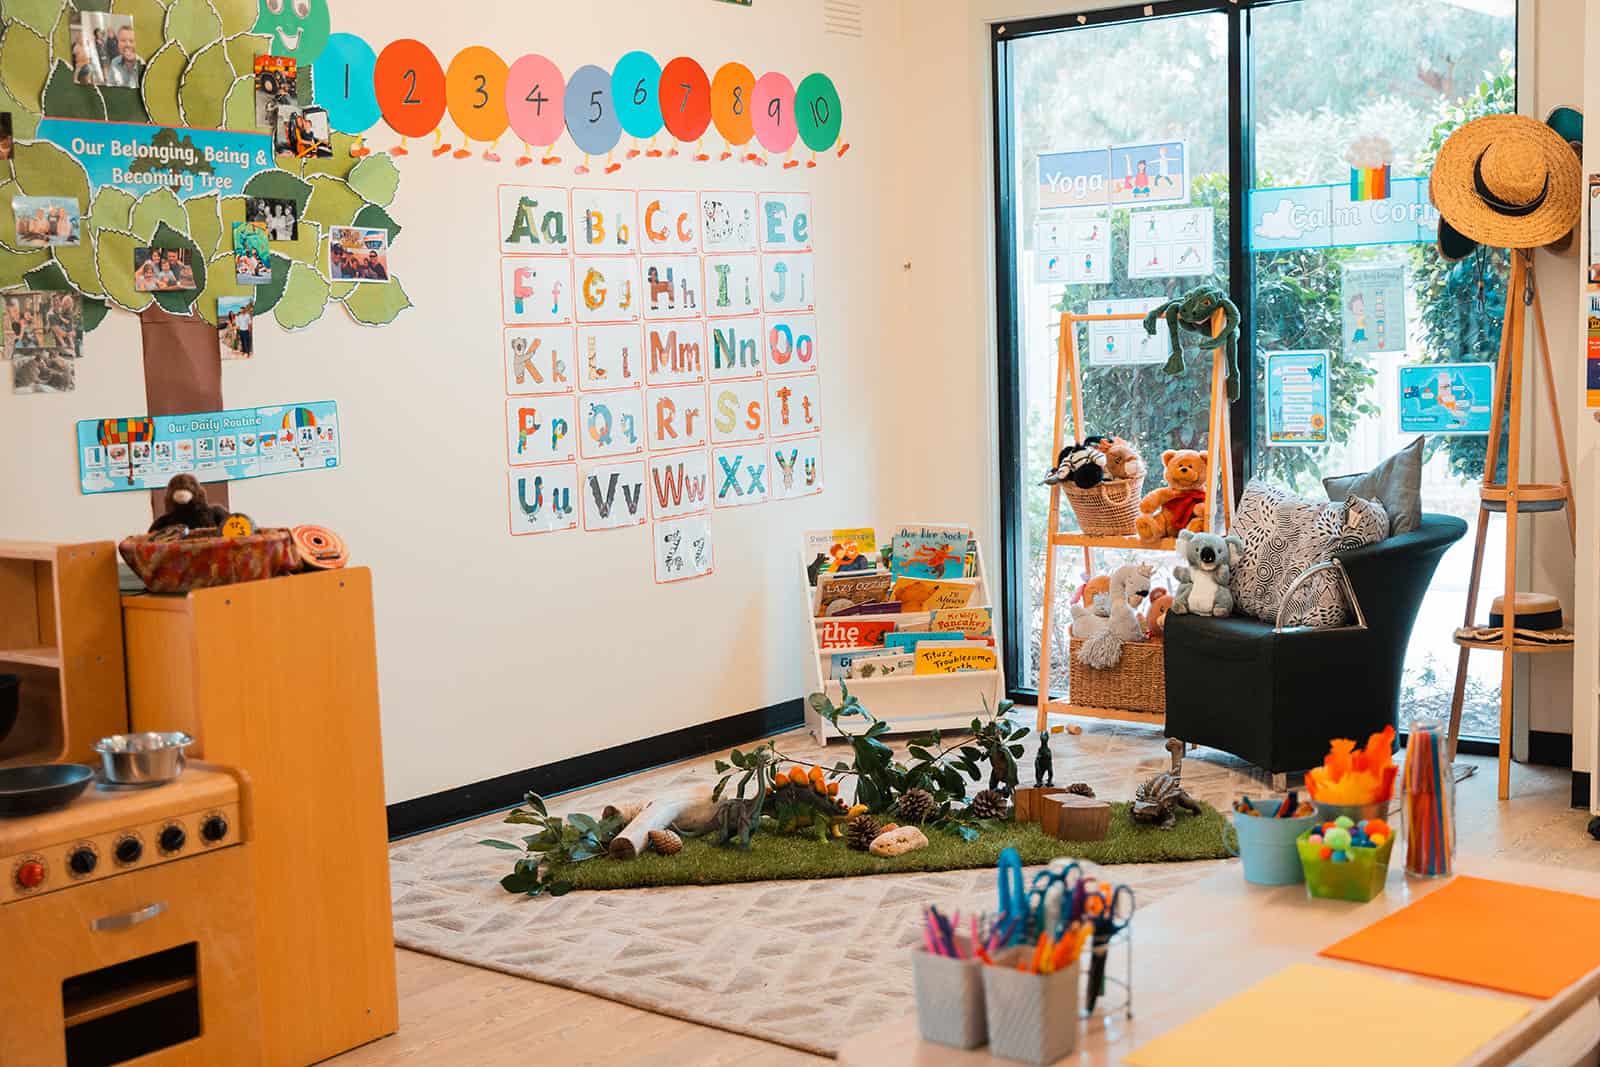 Classroom in a preschool setting with educational materials